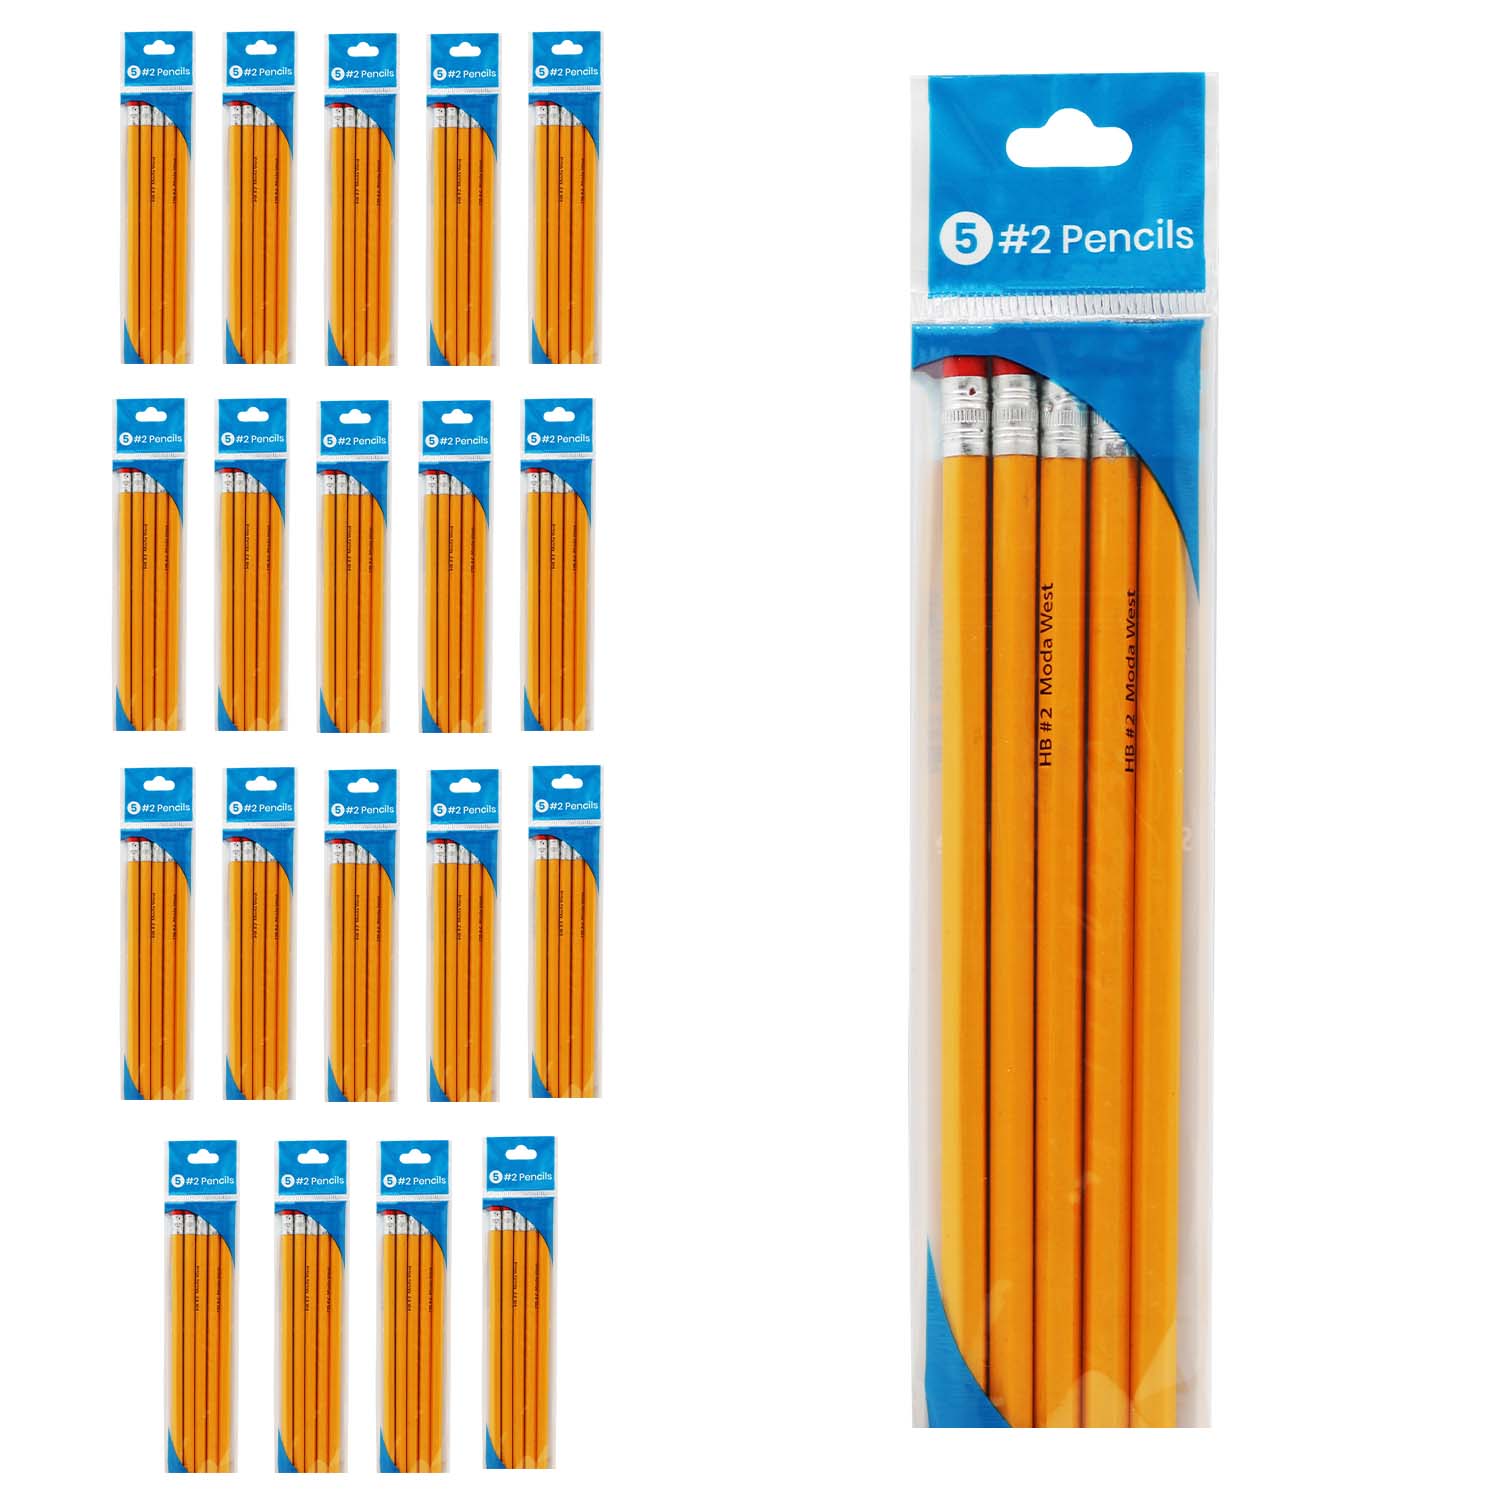 5 Pack of Unsharpened Wood Pencils - Bulk School Supplies Wholesale Case of 192 Pack of 5 Pencils Each, Yellow